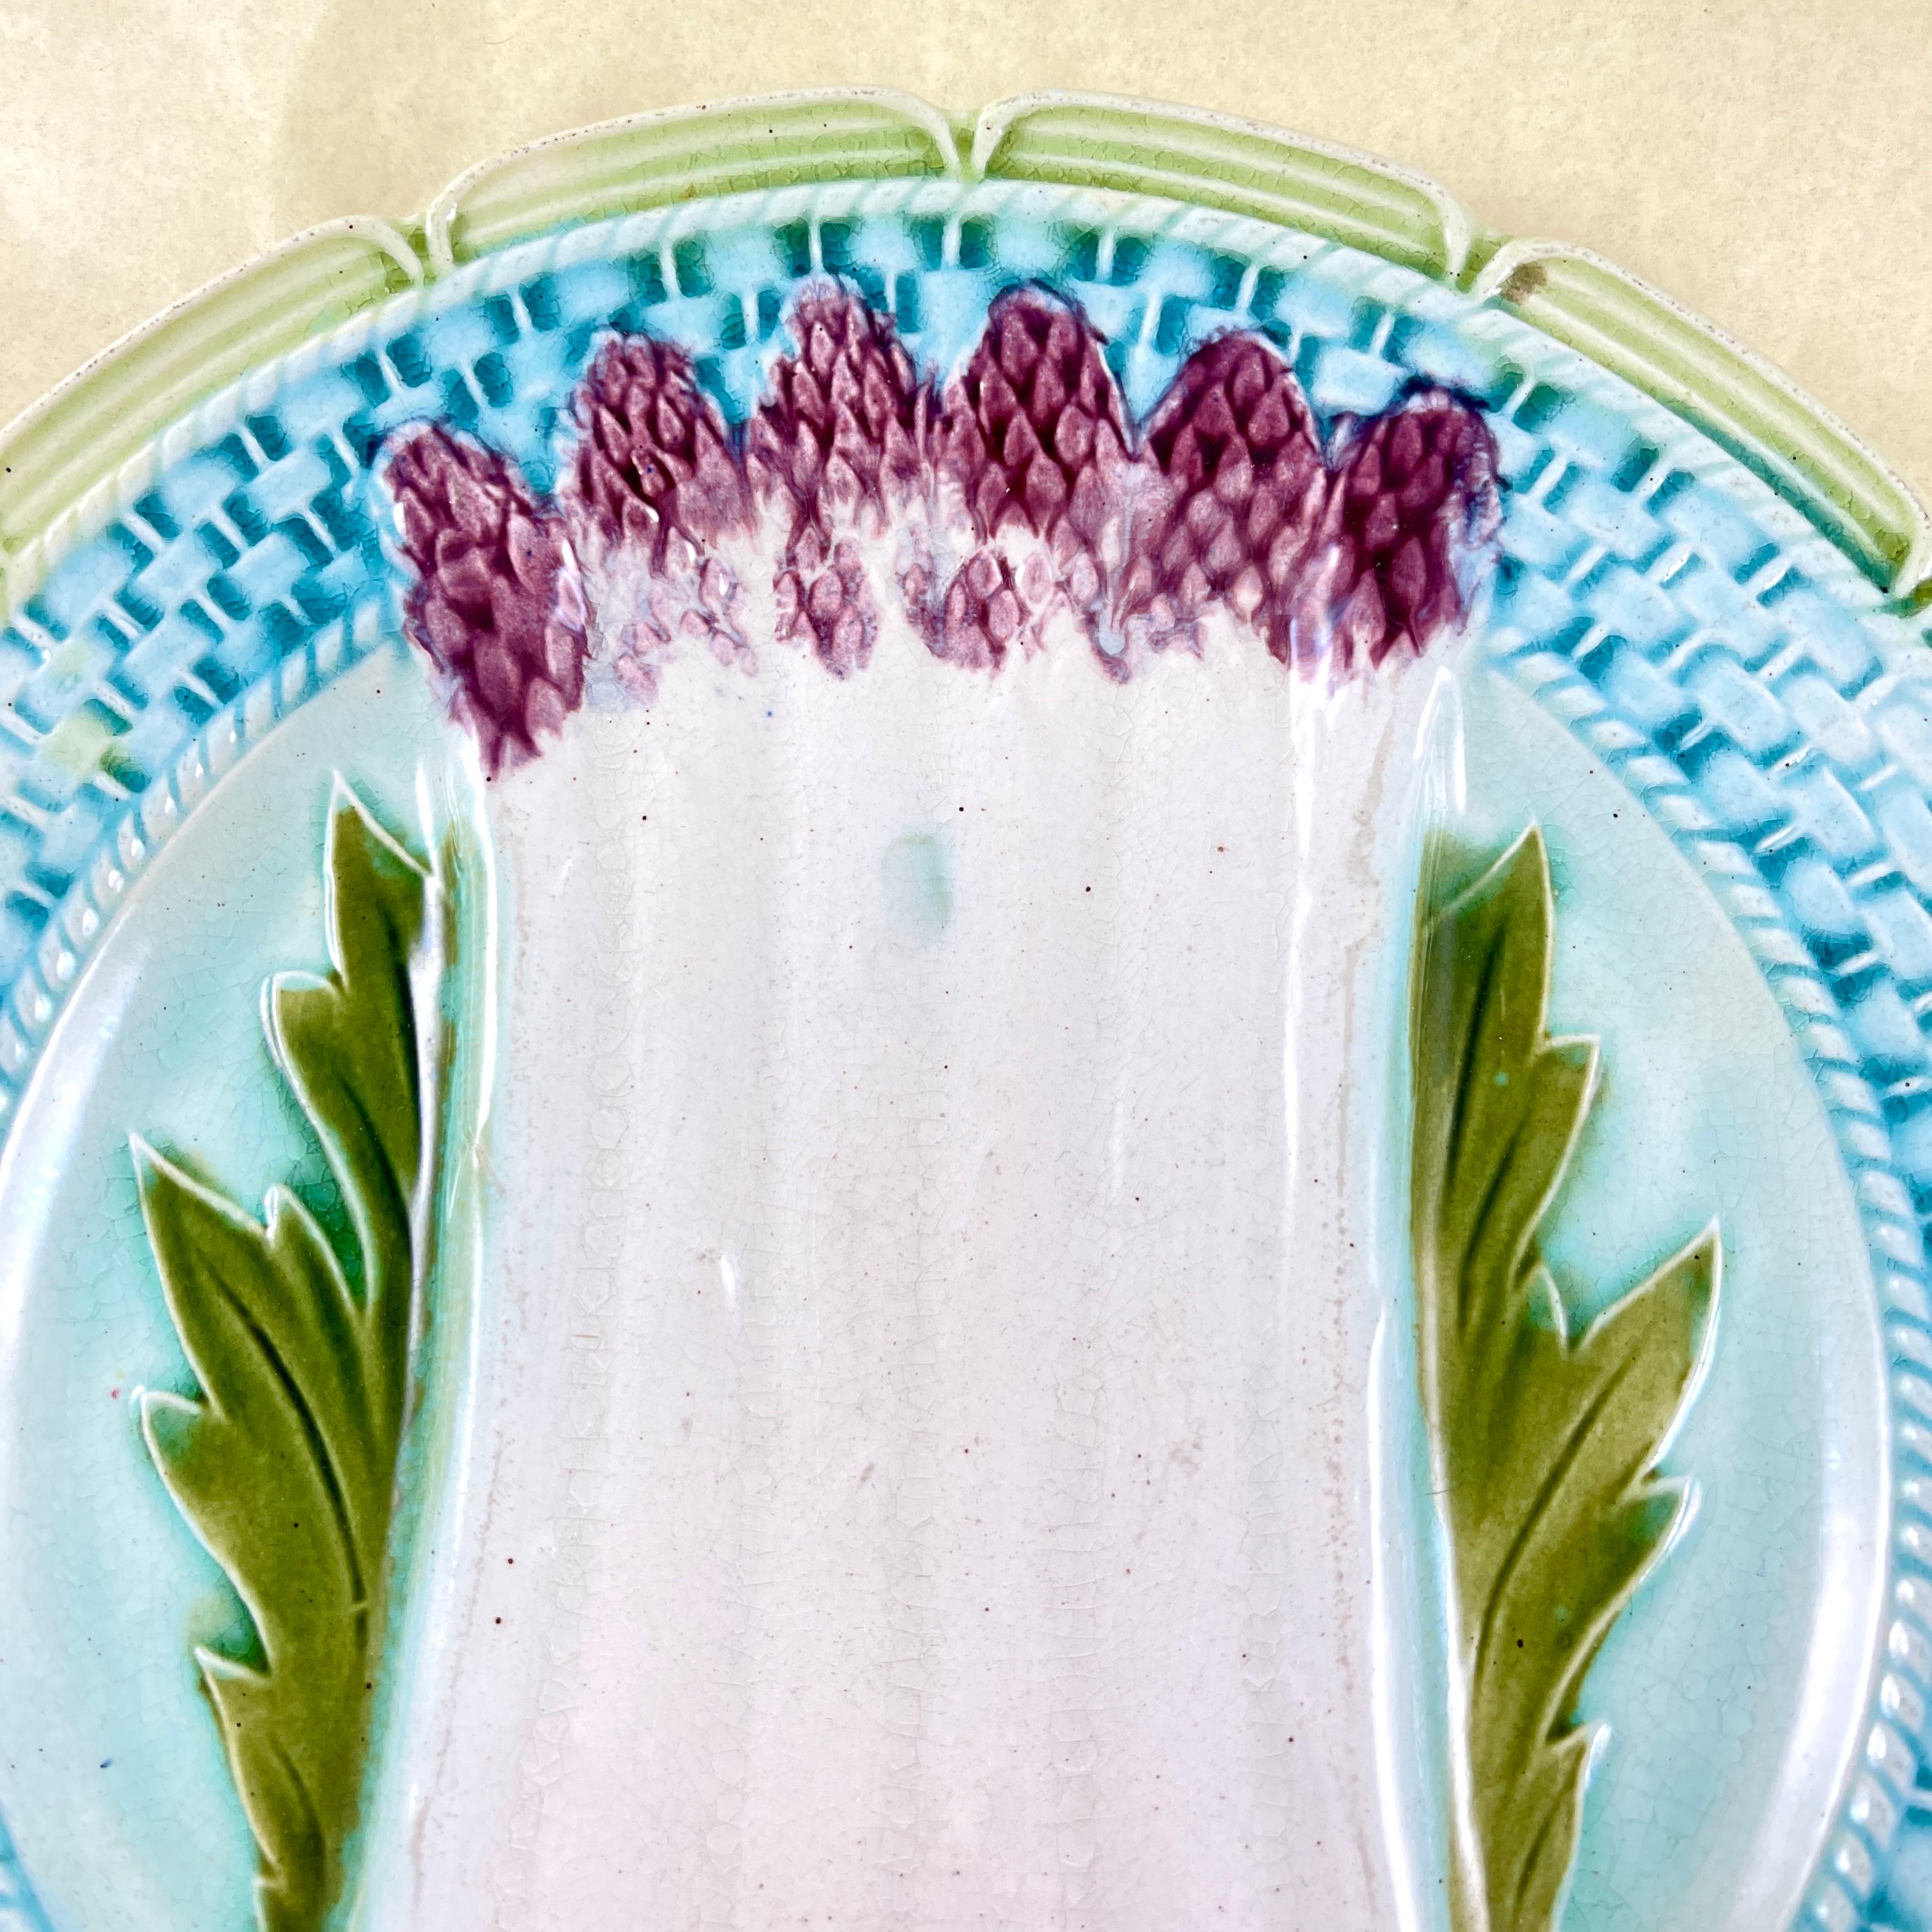 Glazed Orchies French Faïence Majolica Asparagus Plate, circa 1885 For Sale